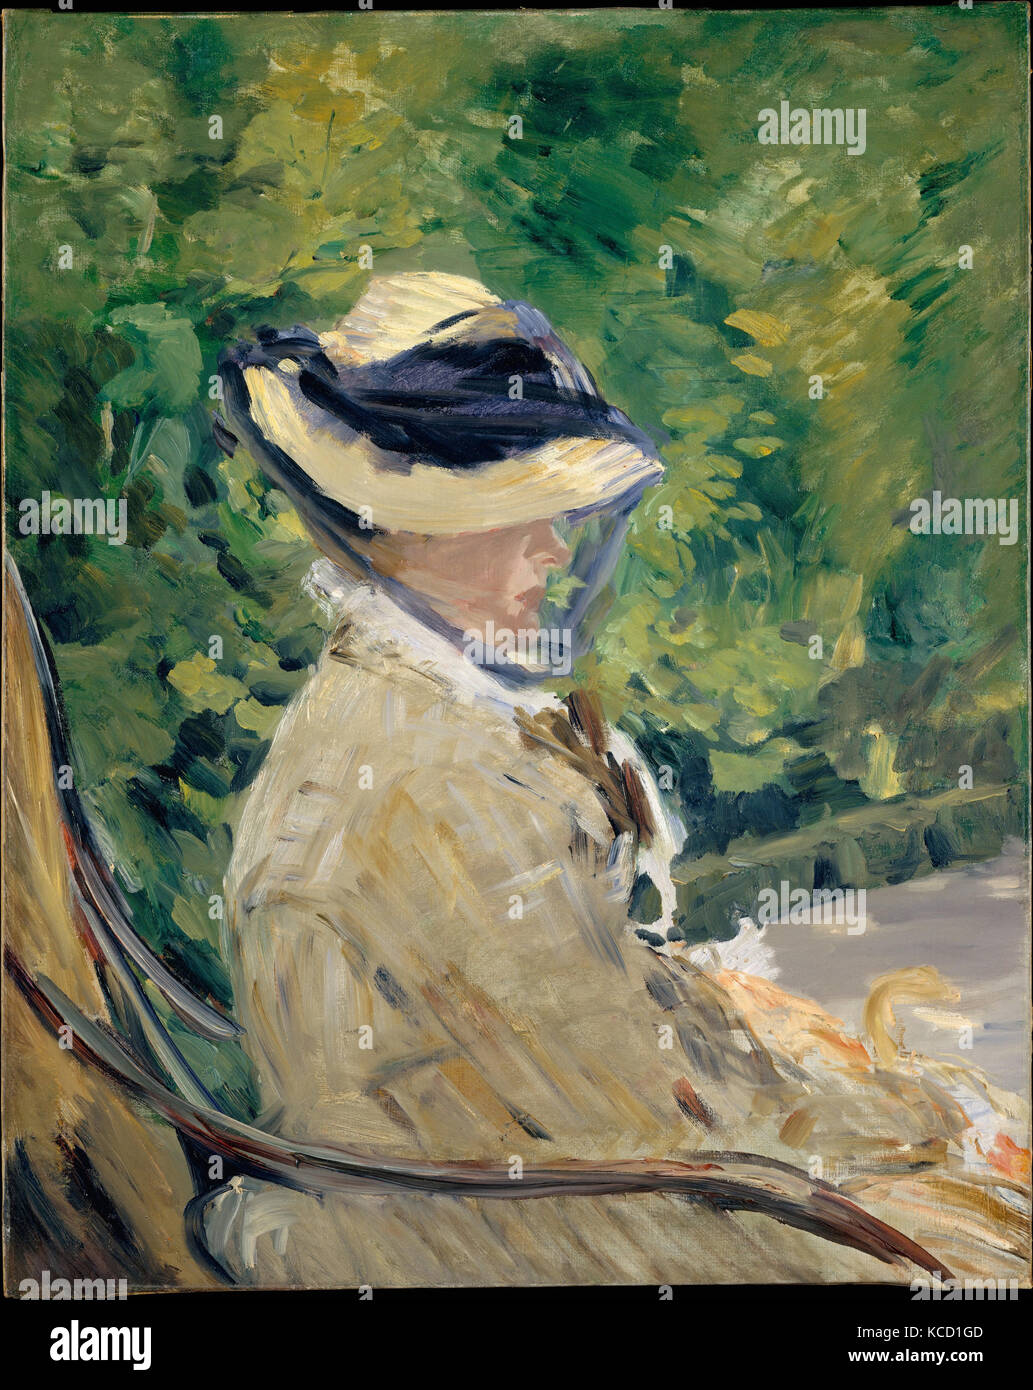 Madame Manet (Suzanne Leenhoff, 1830–1906) at Bellevue, Édouard Manet, 1880 Stock Photo